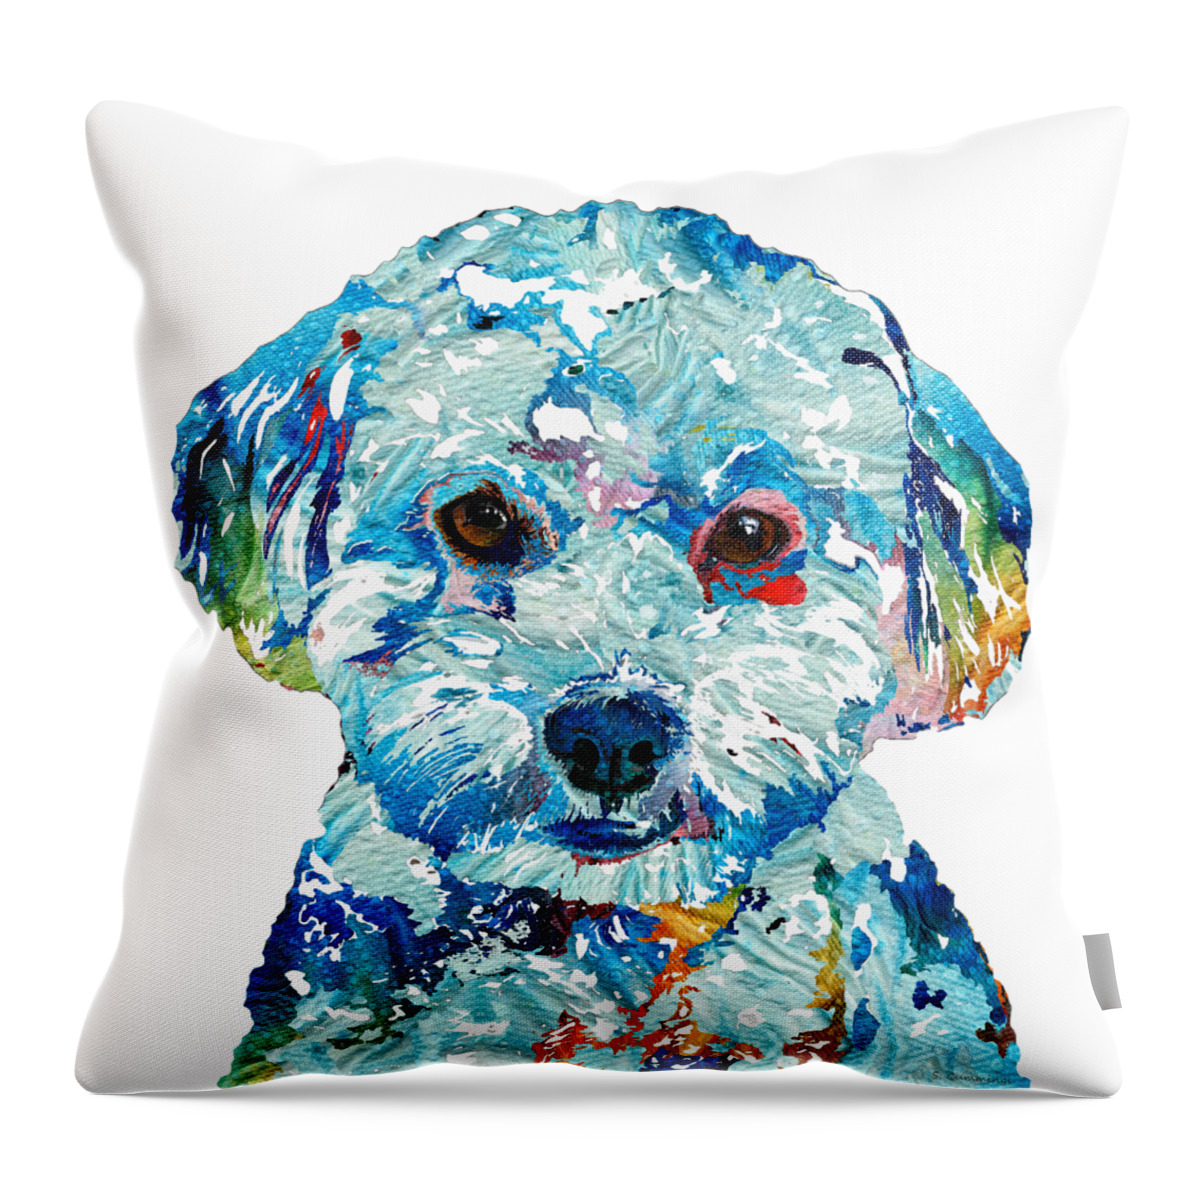 Small Dog Throw Pillow featuring the painting Small Dog Art - Soft Love - Sharon Cummings by Sharon Cummings